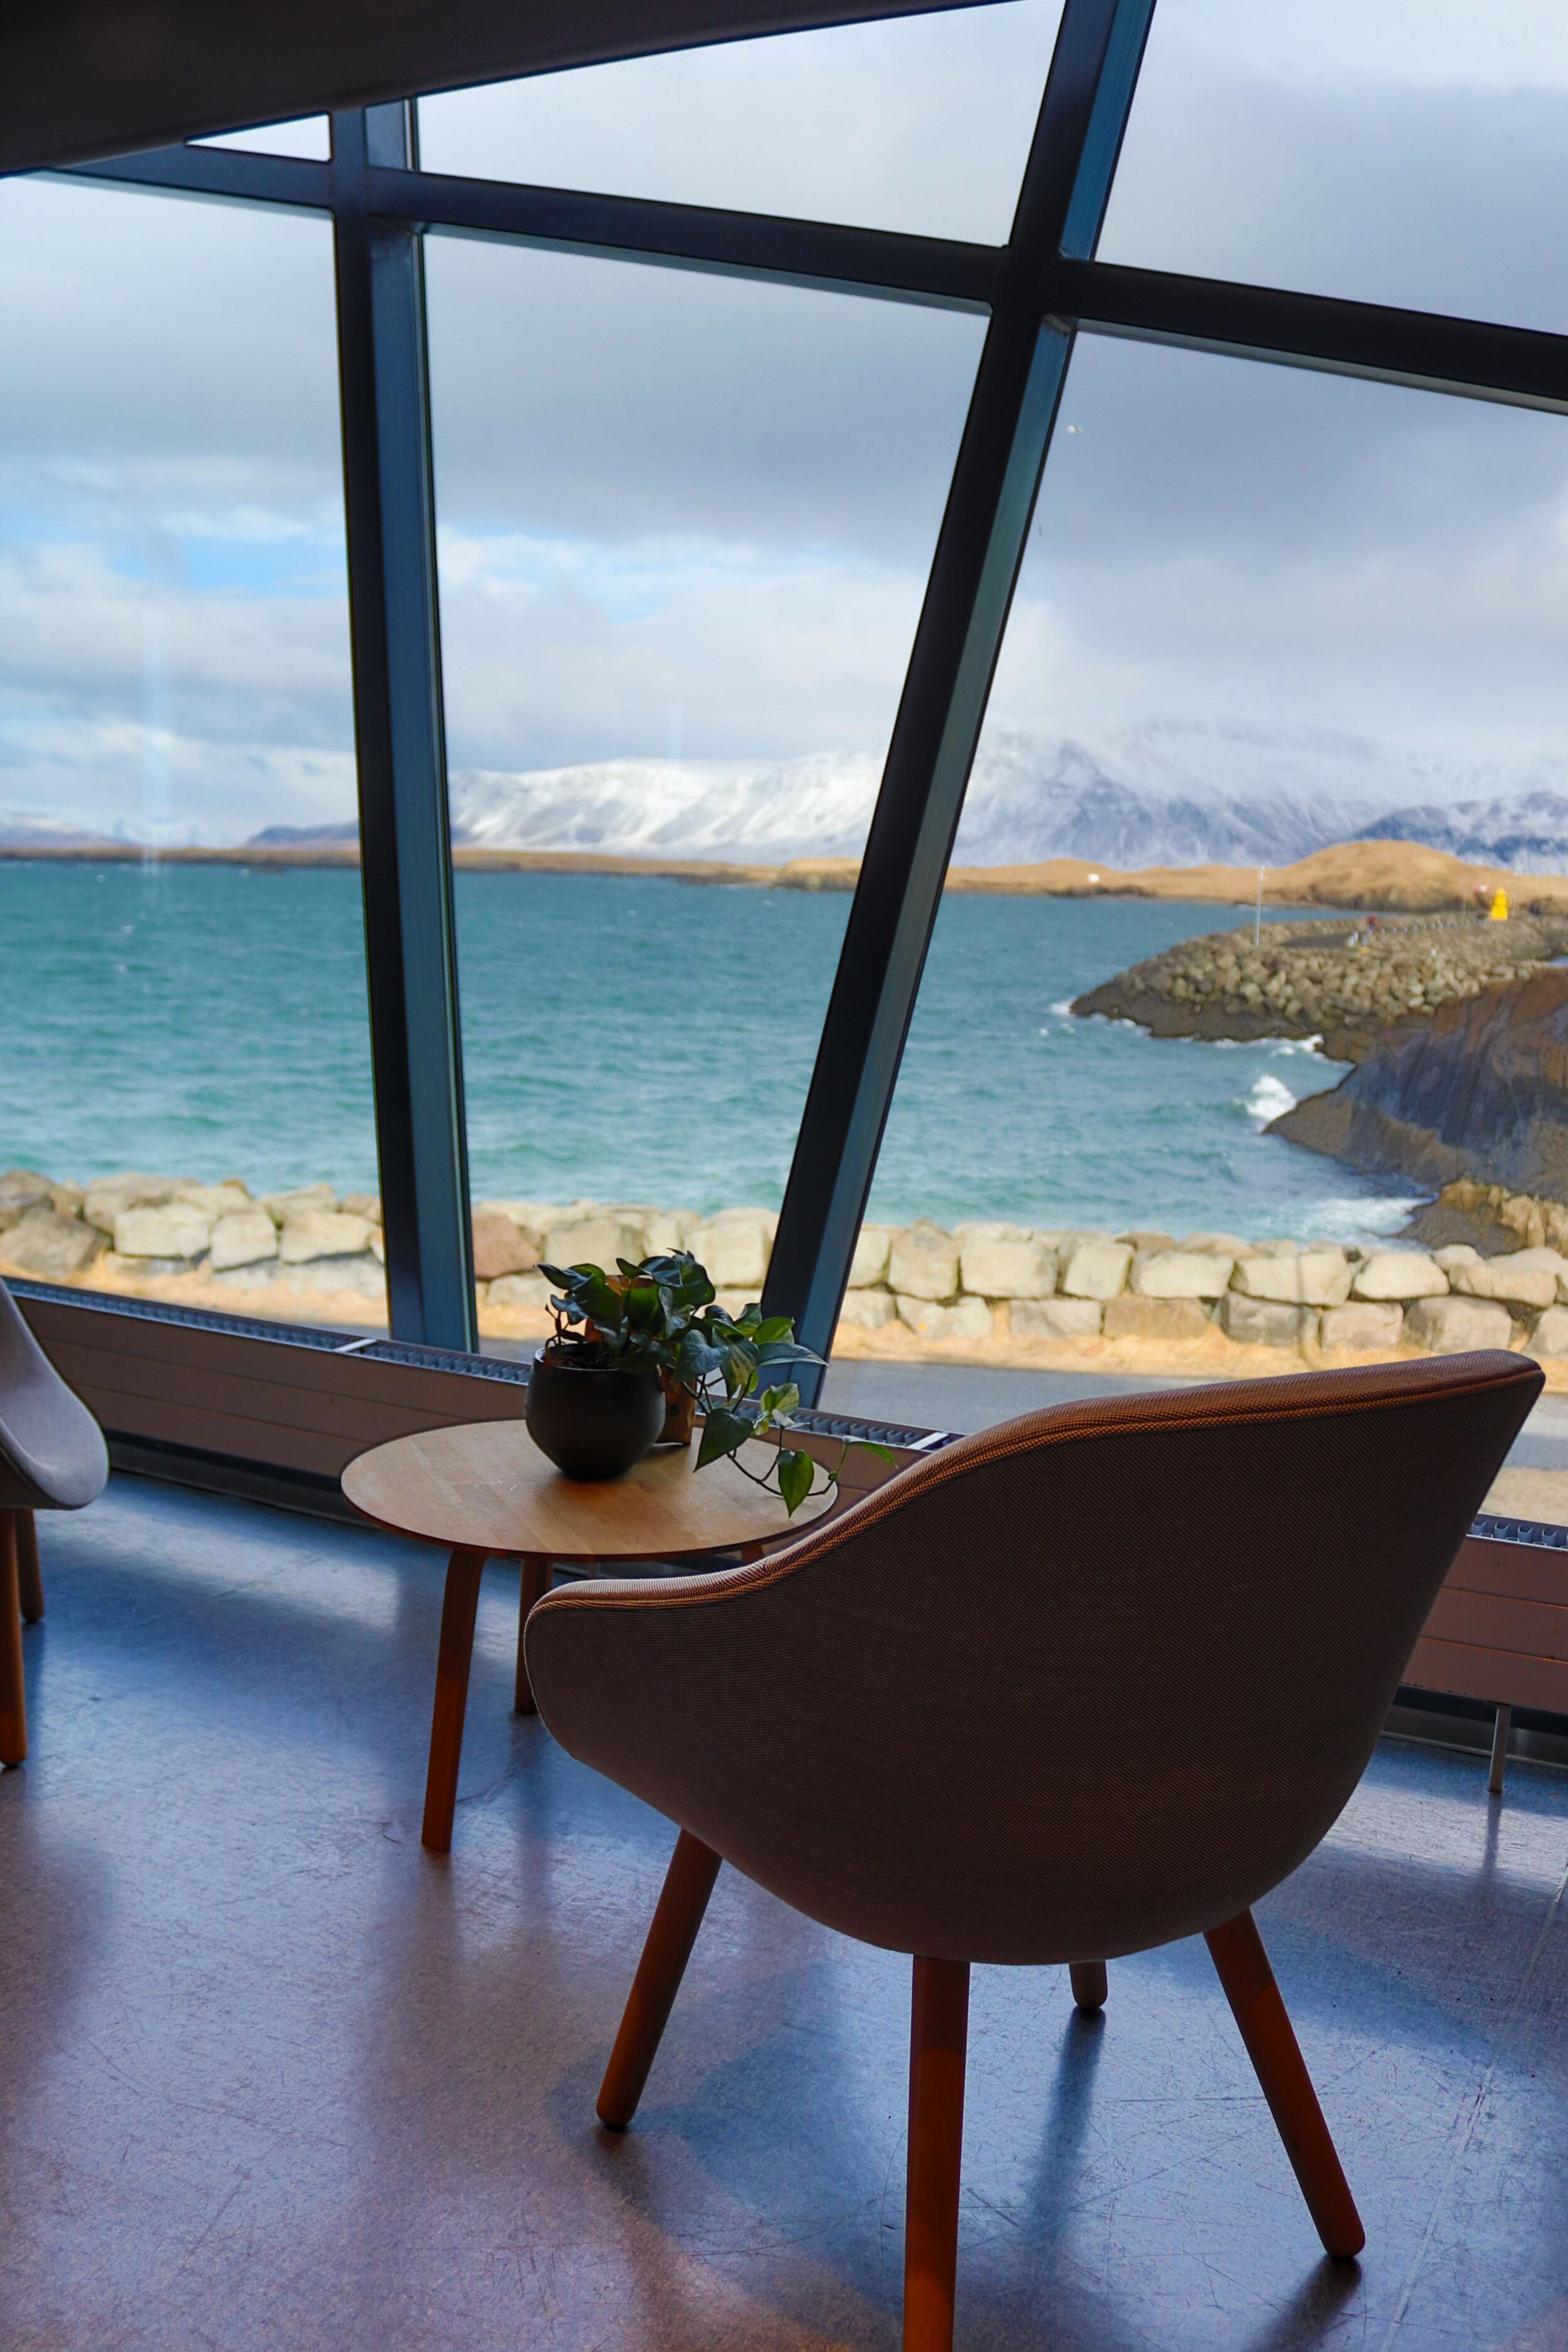 A room with modern furnishings including two chairs and a table, view through the window with a focus on a table set with two chairs, a small plant in the center, and a pair of glasses, suggesting a cozy spot for a meeting or relaxation with the same picturesque view of the sea and mountains.